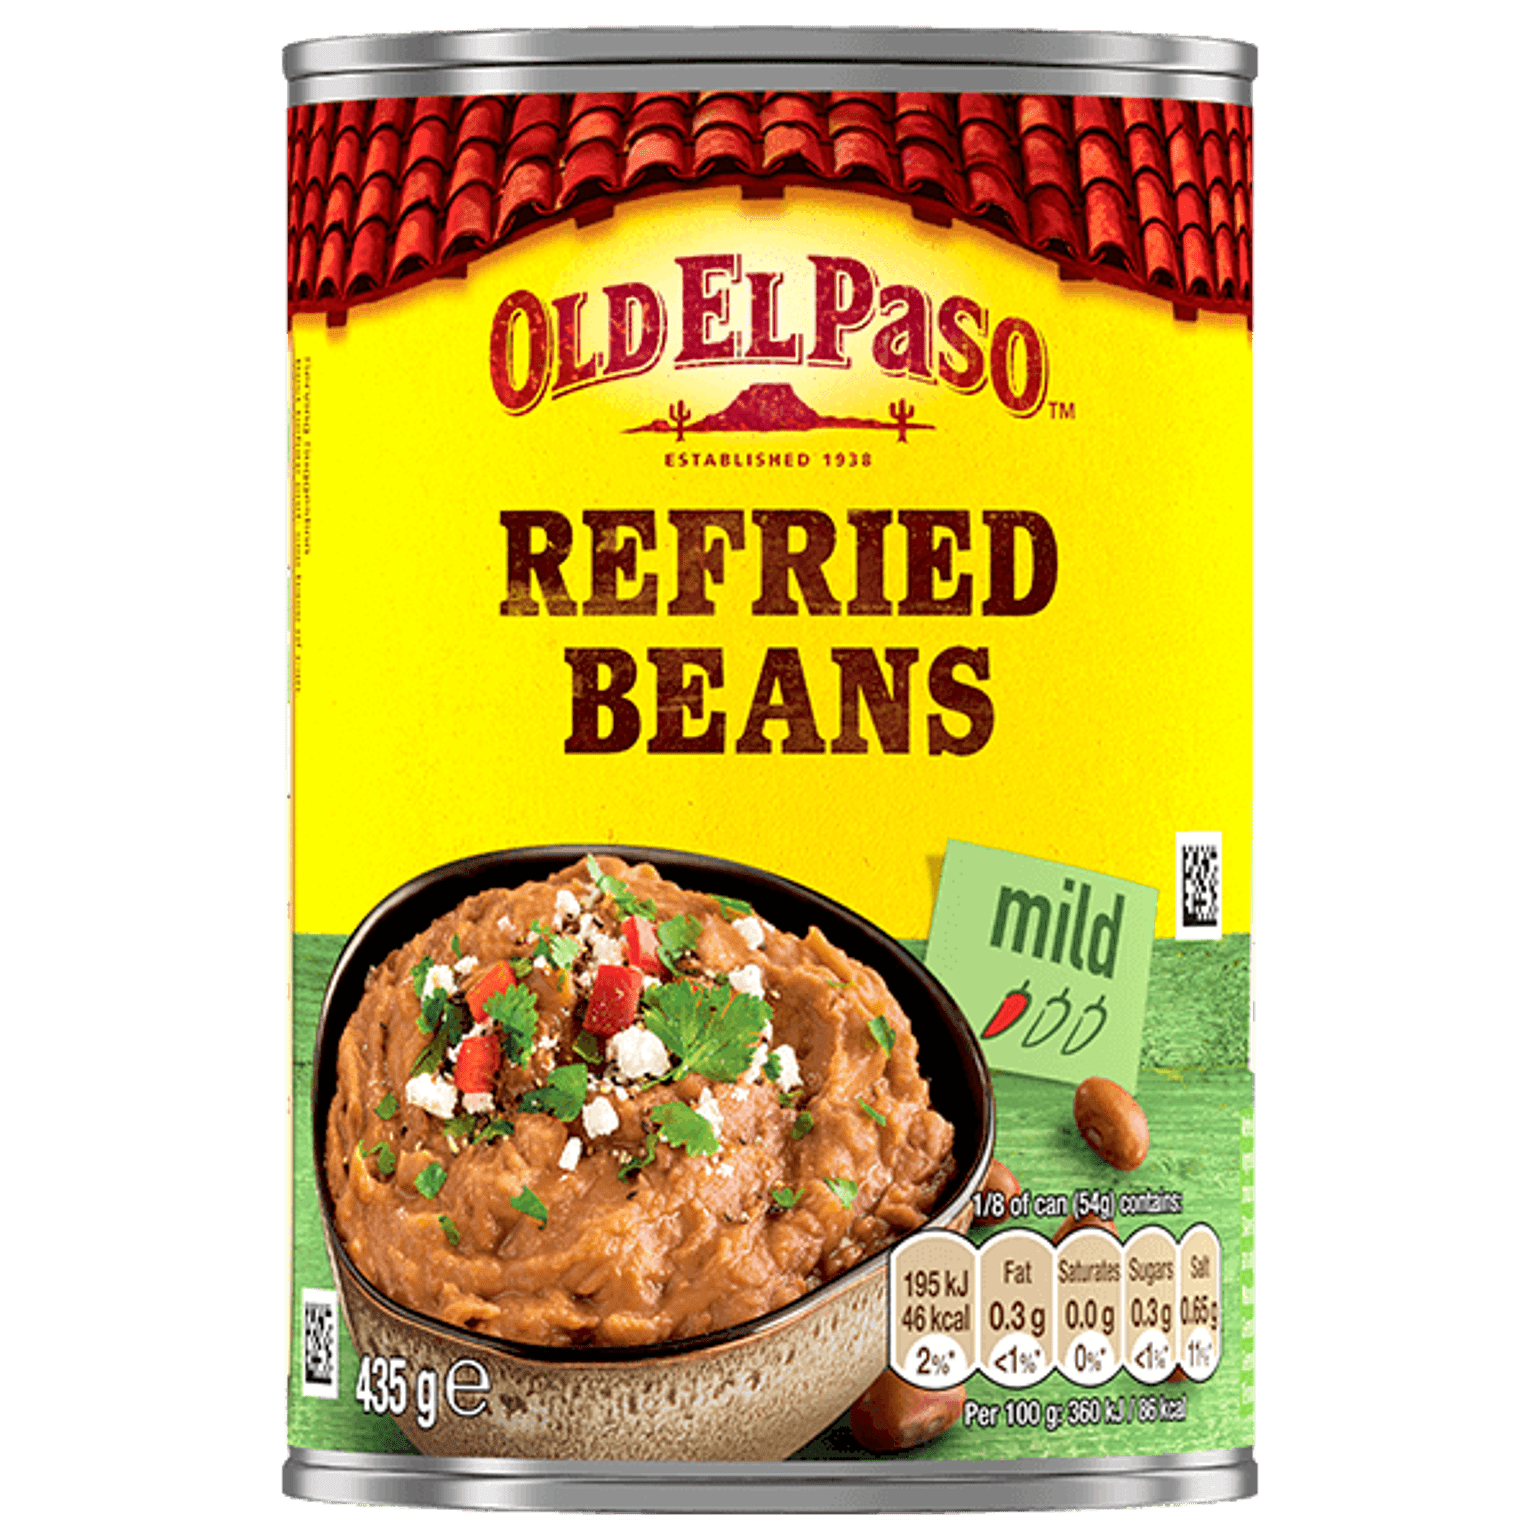 can of Old El Paso's refried beans (435g)